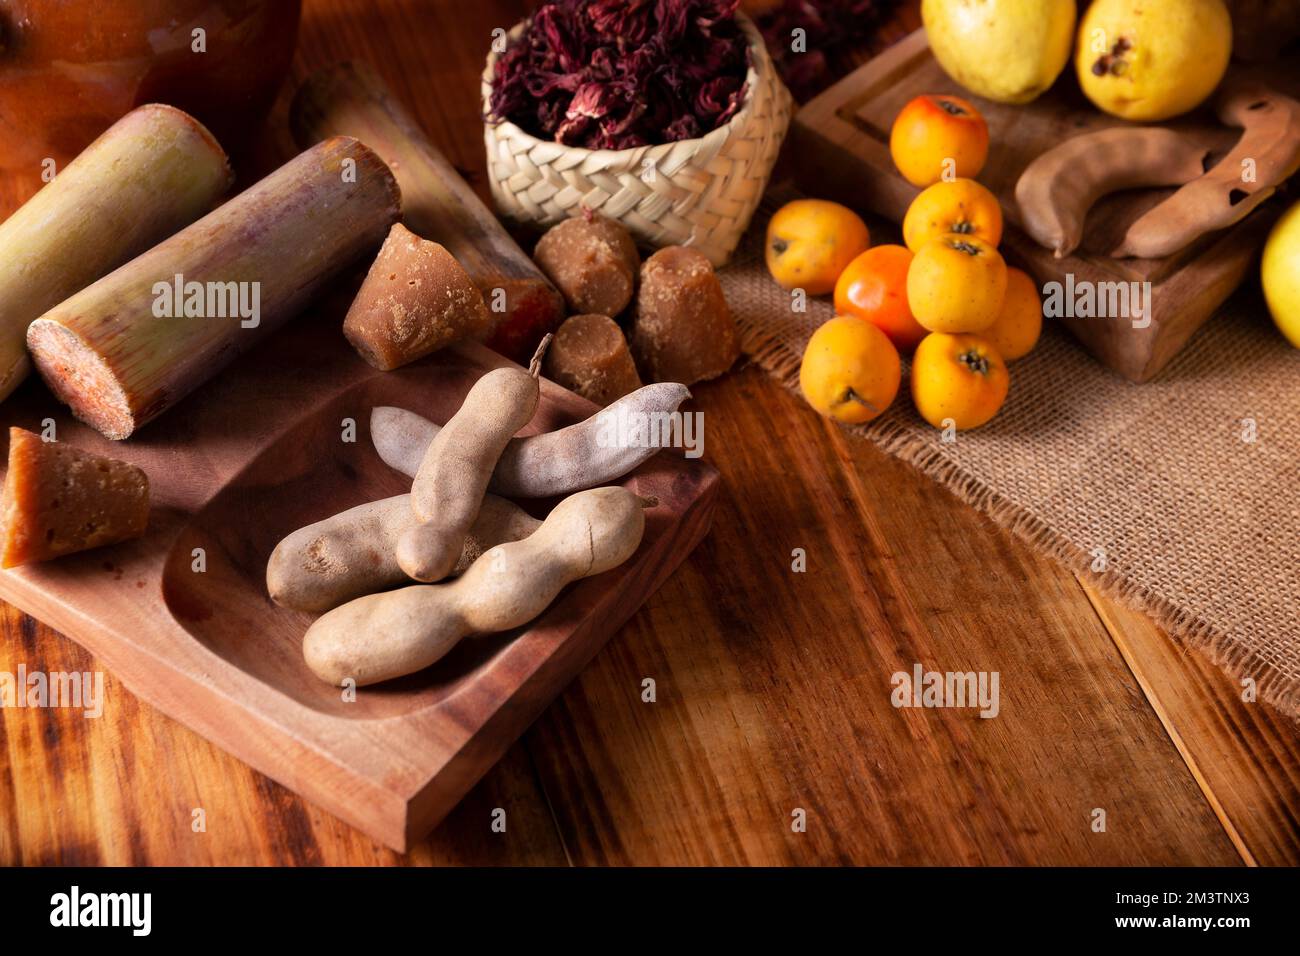 Basic ingredients to prepare Mexican fruit punch, a hot drink traditionally consumed during the December season at posadas and Christmas celebrations. Stock Photo